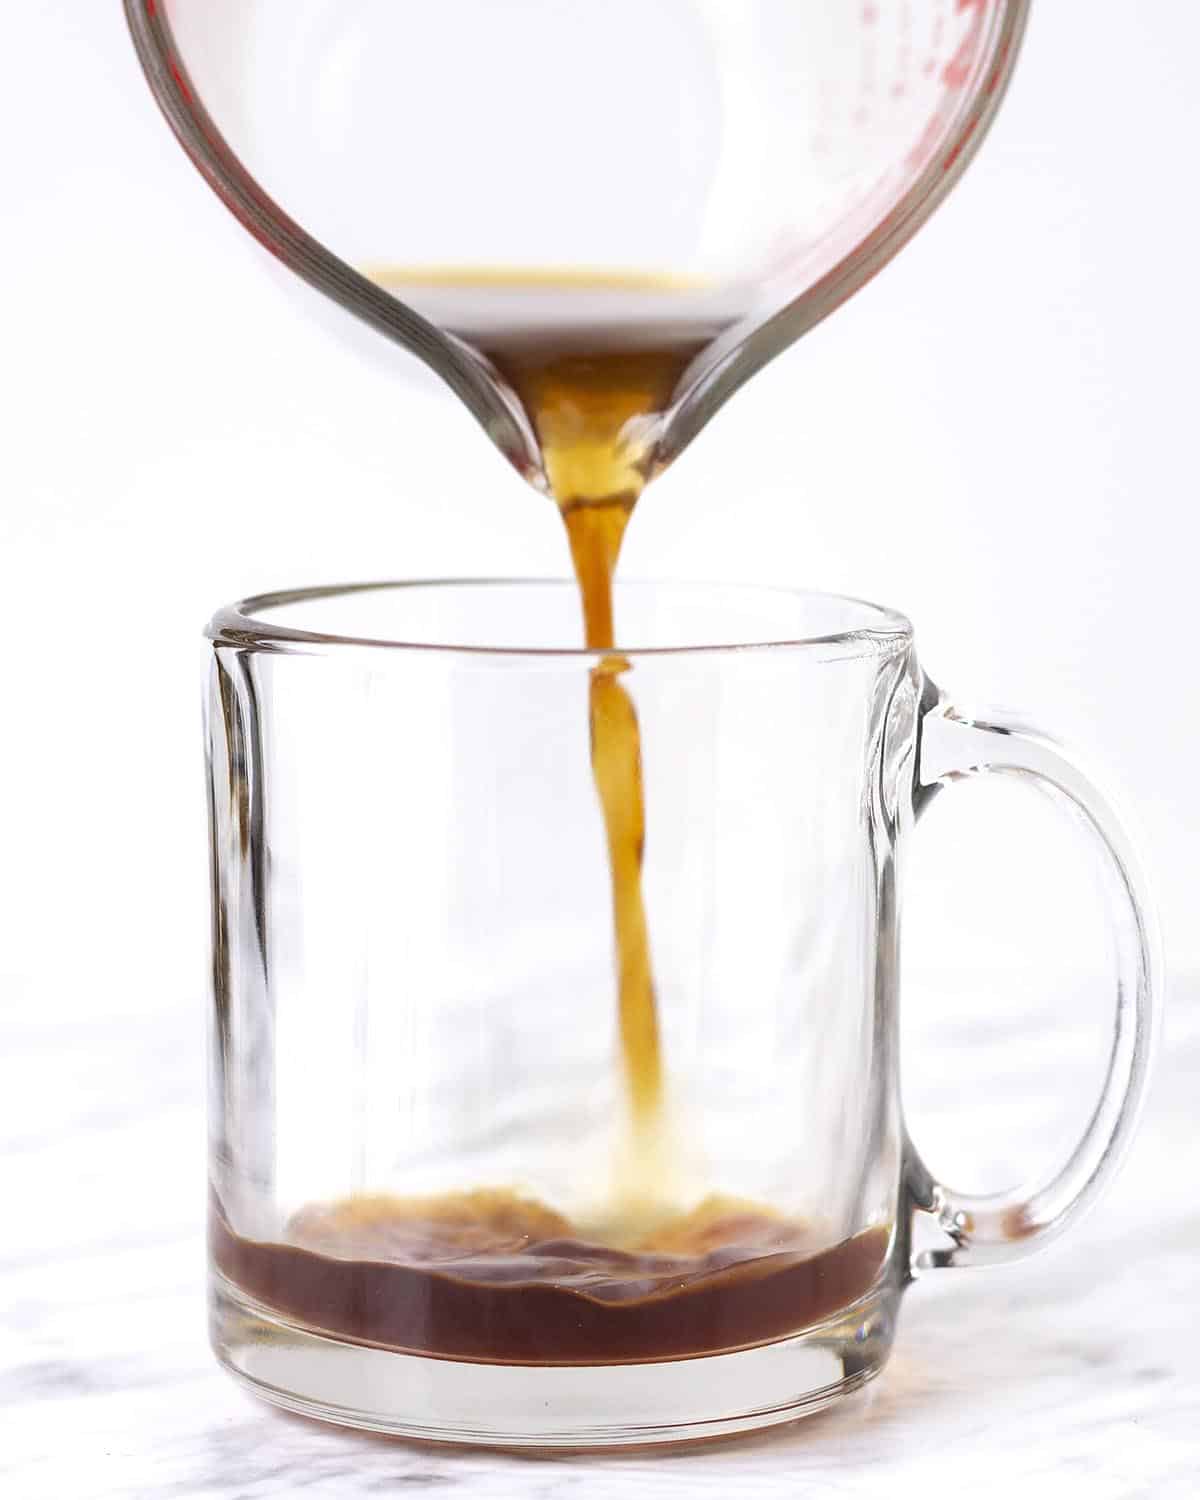 Freshly brewed coffee being poured into a clear glass mug.